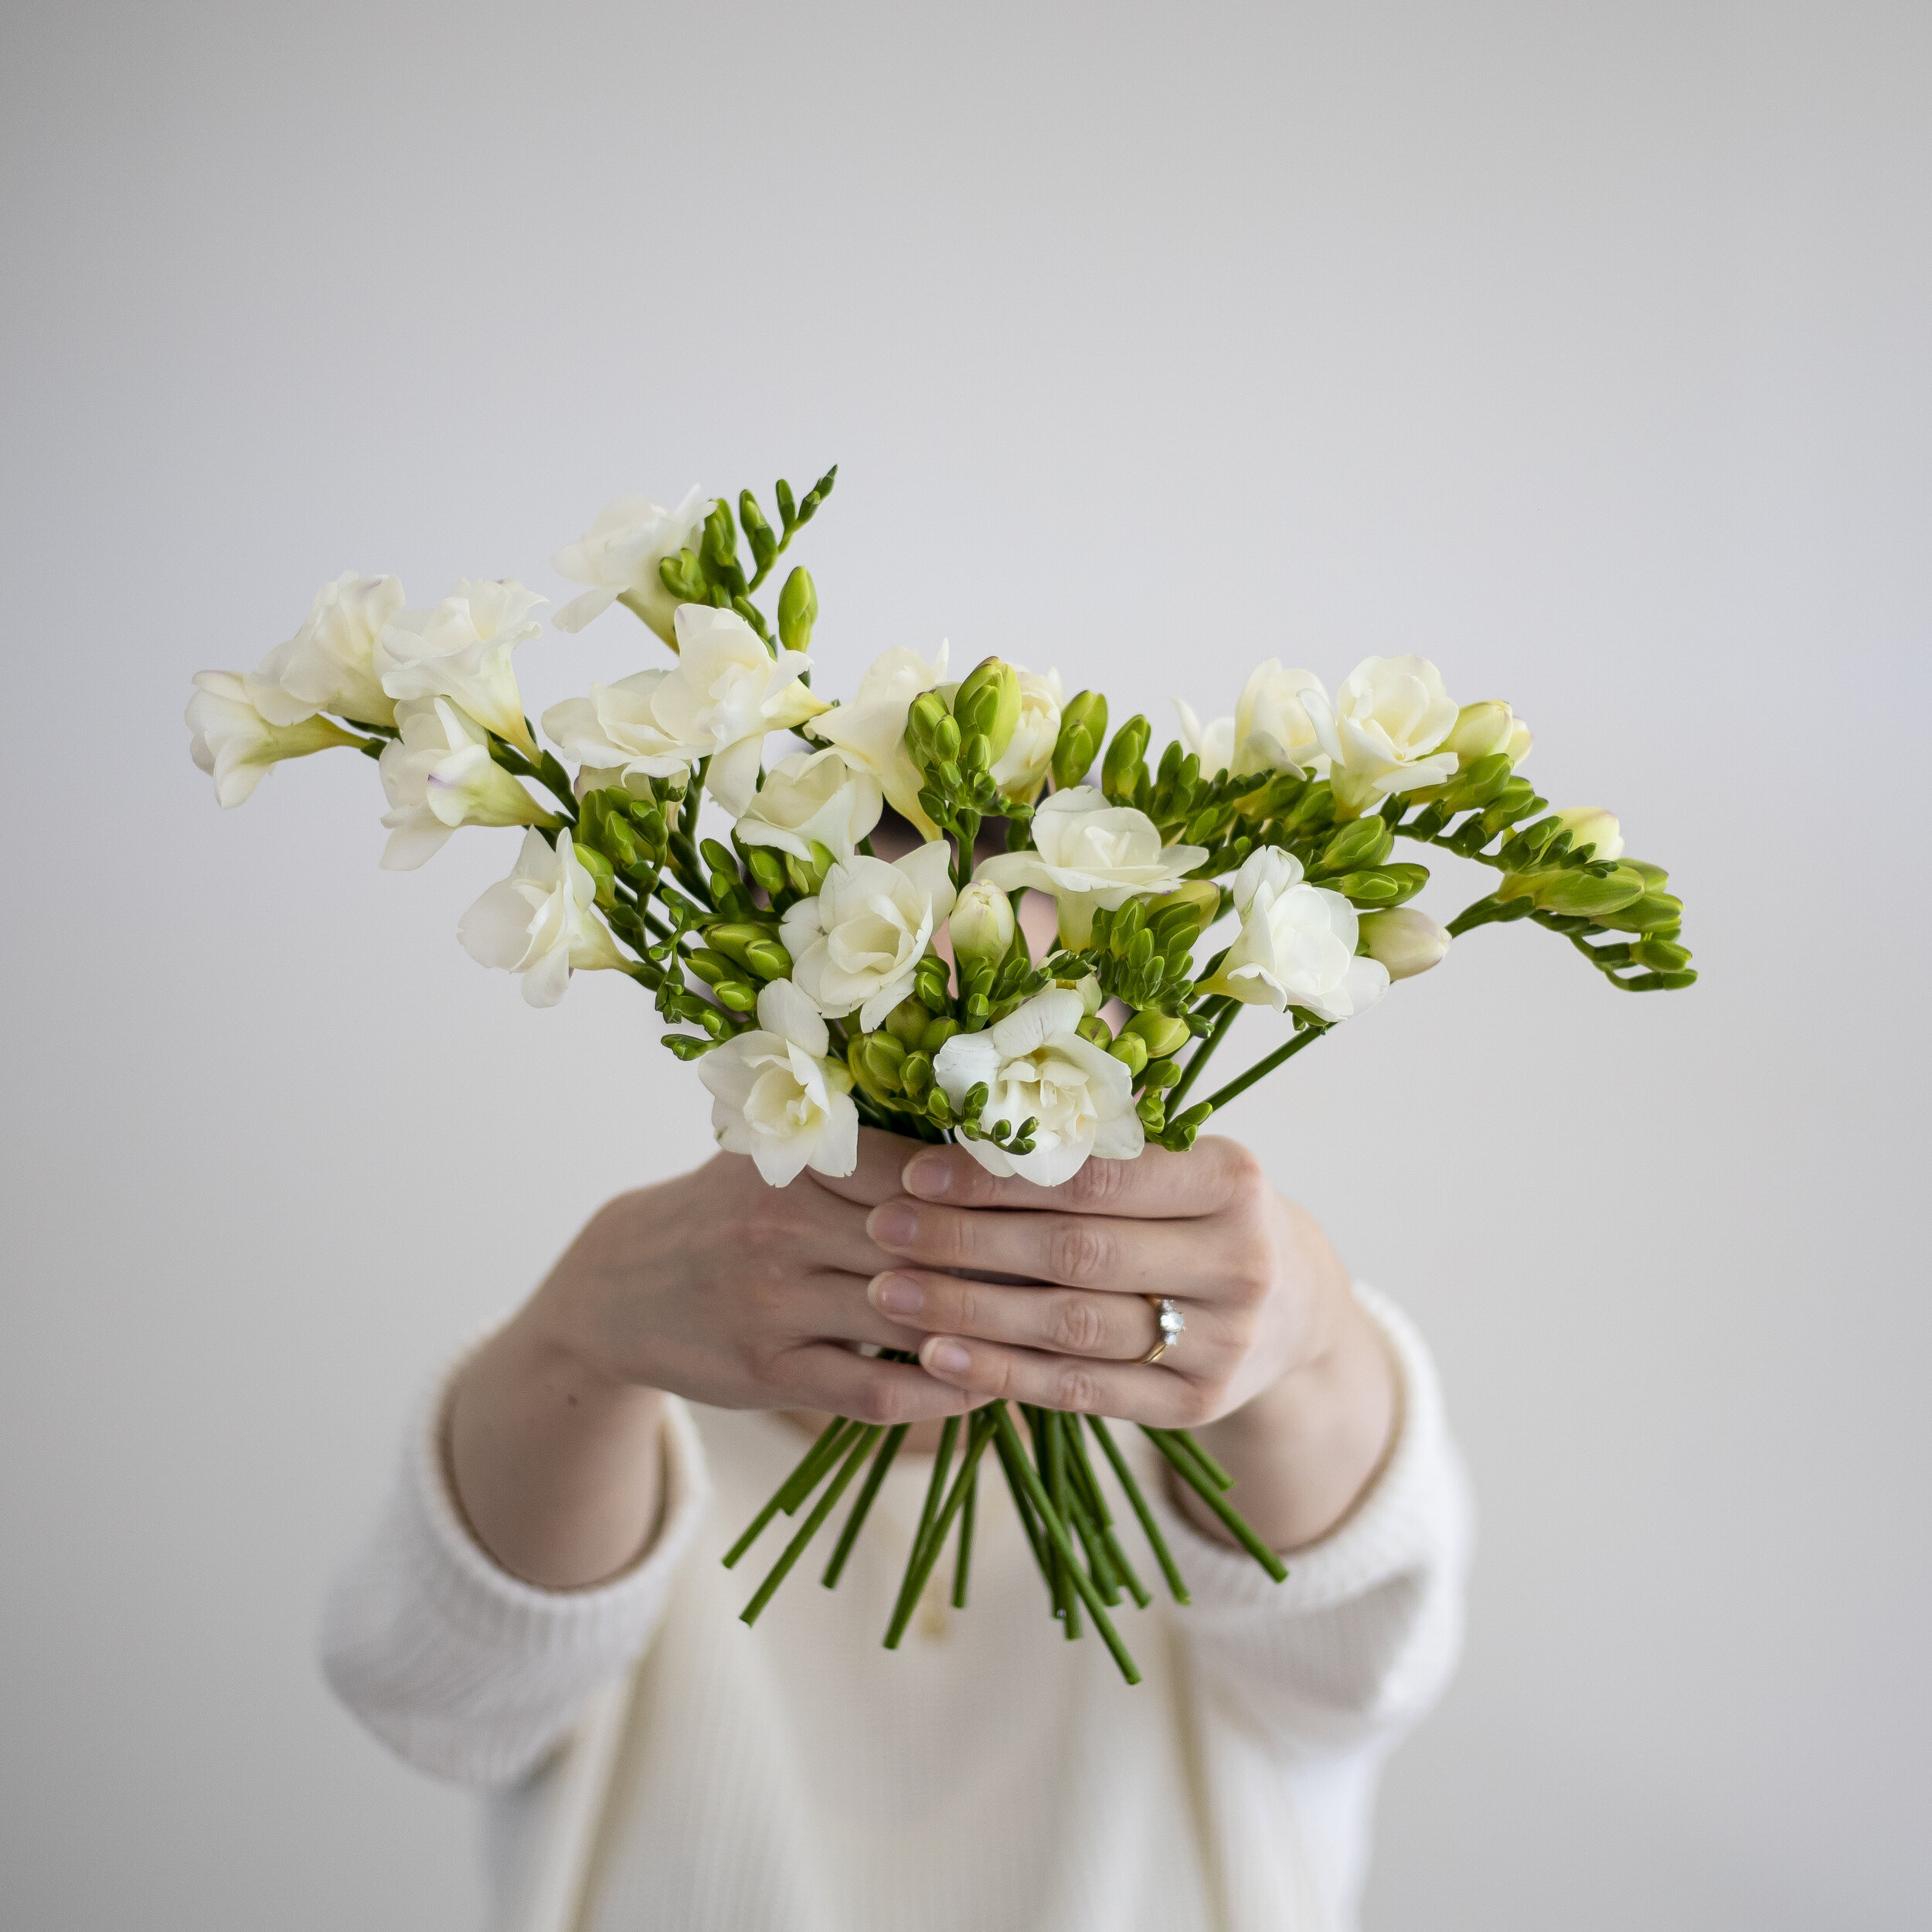 A bouquet of white freesia flowers being held up by a person in front of a white background